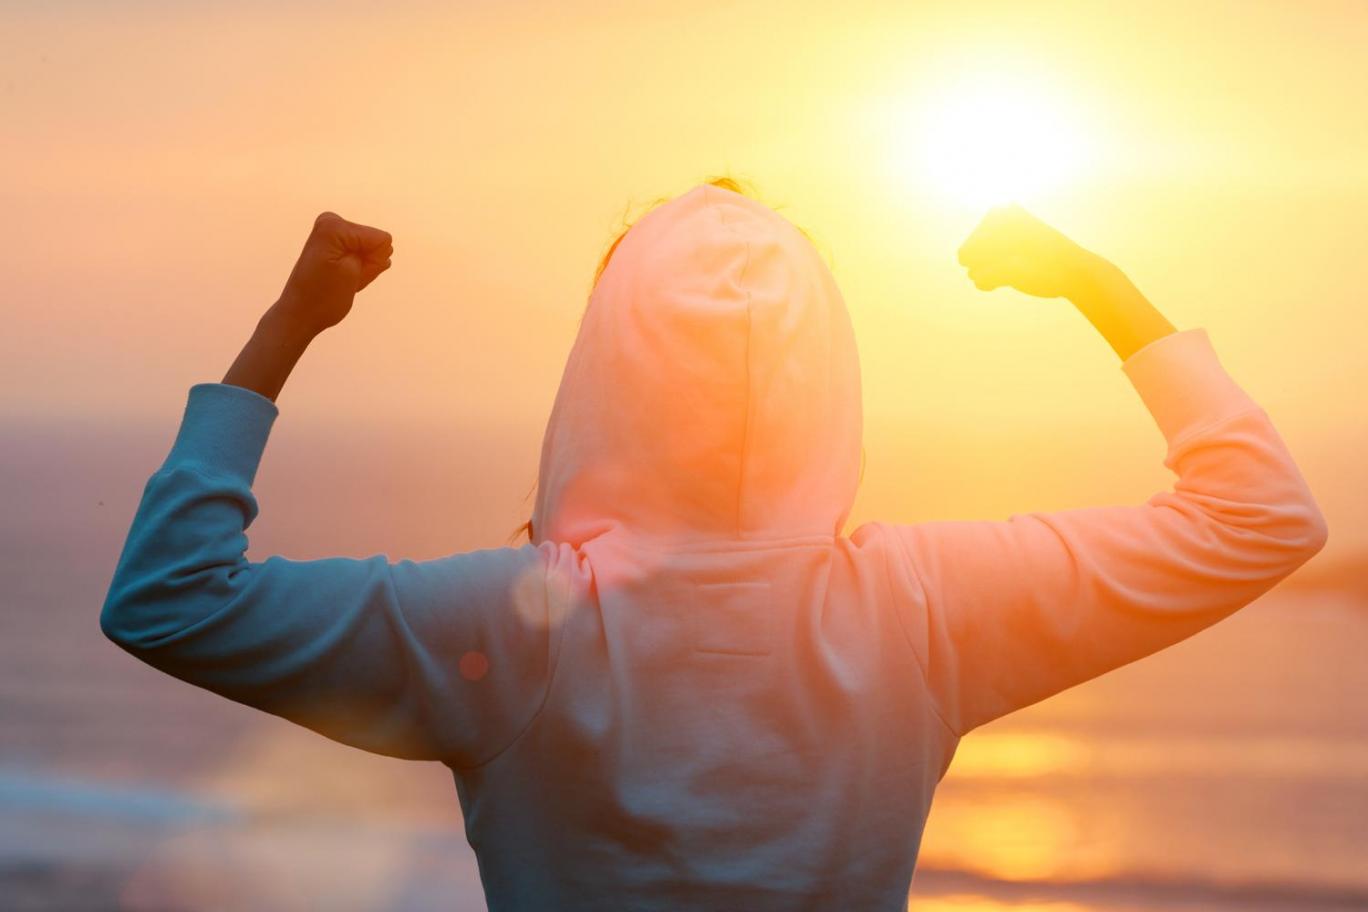 Image of the back of a person wearing a hoodie at sunset on a beach, their arms raised as if celebrating.